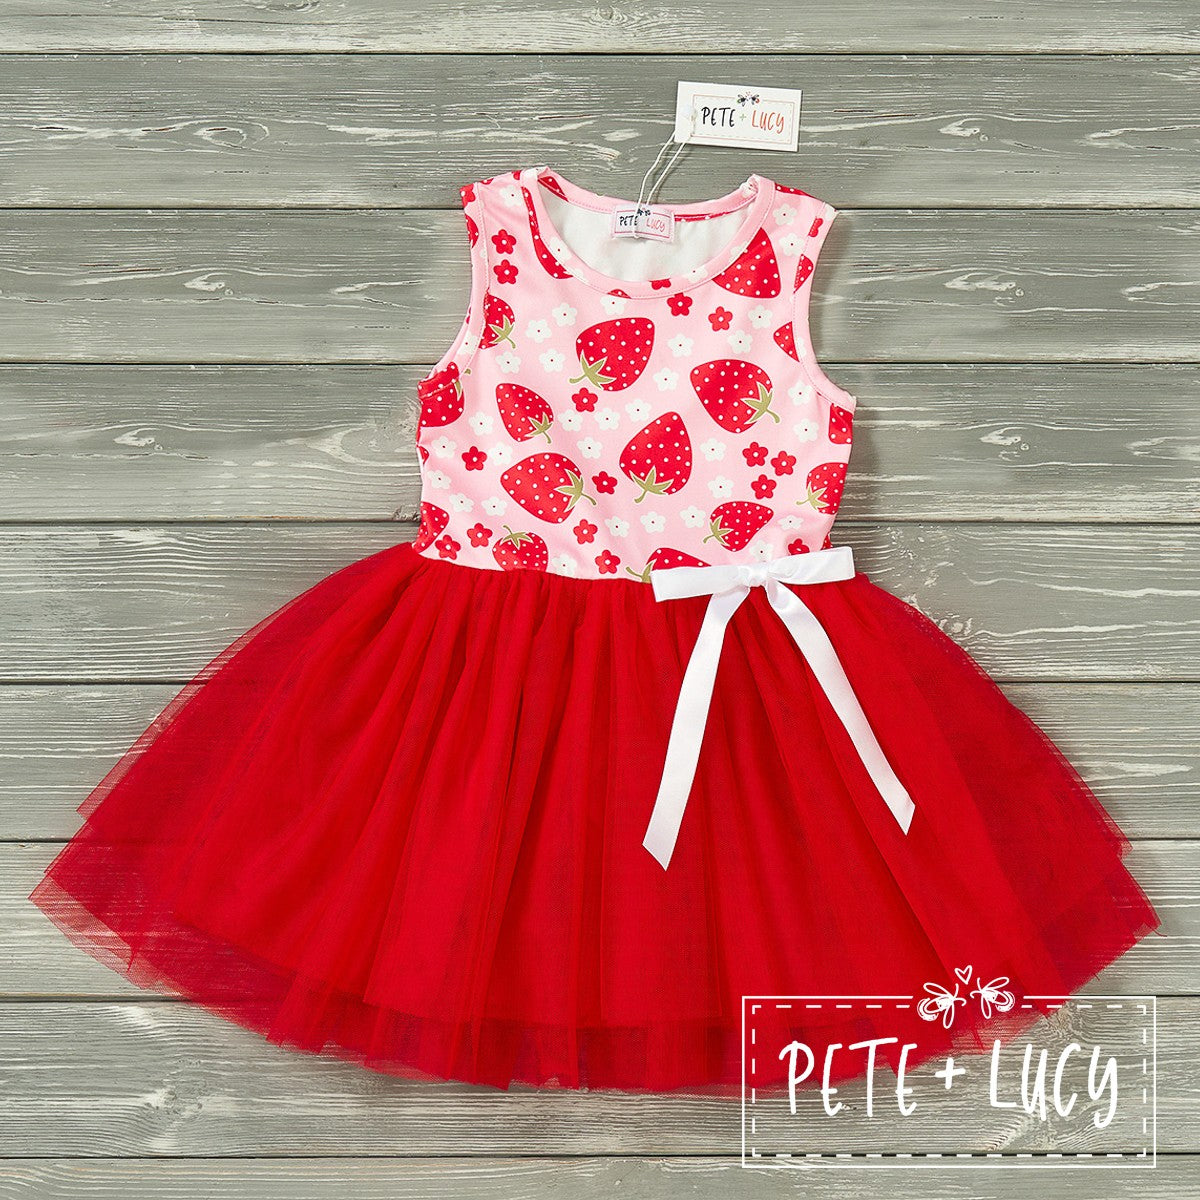 Pink and red tulle dress with a strawberry print on the top